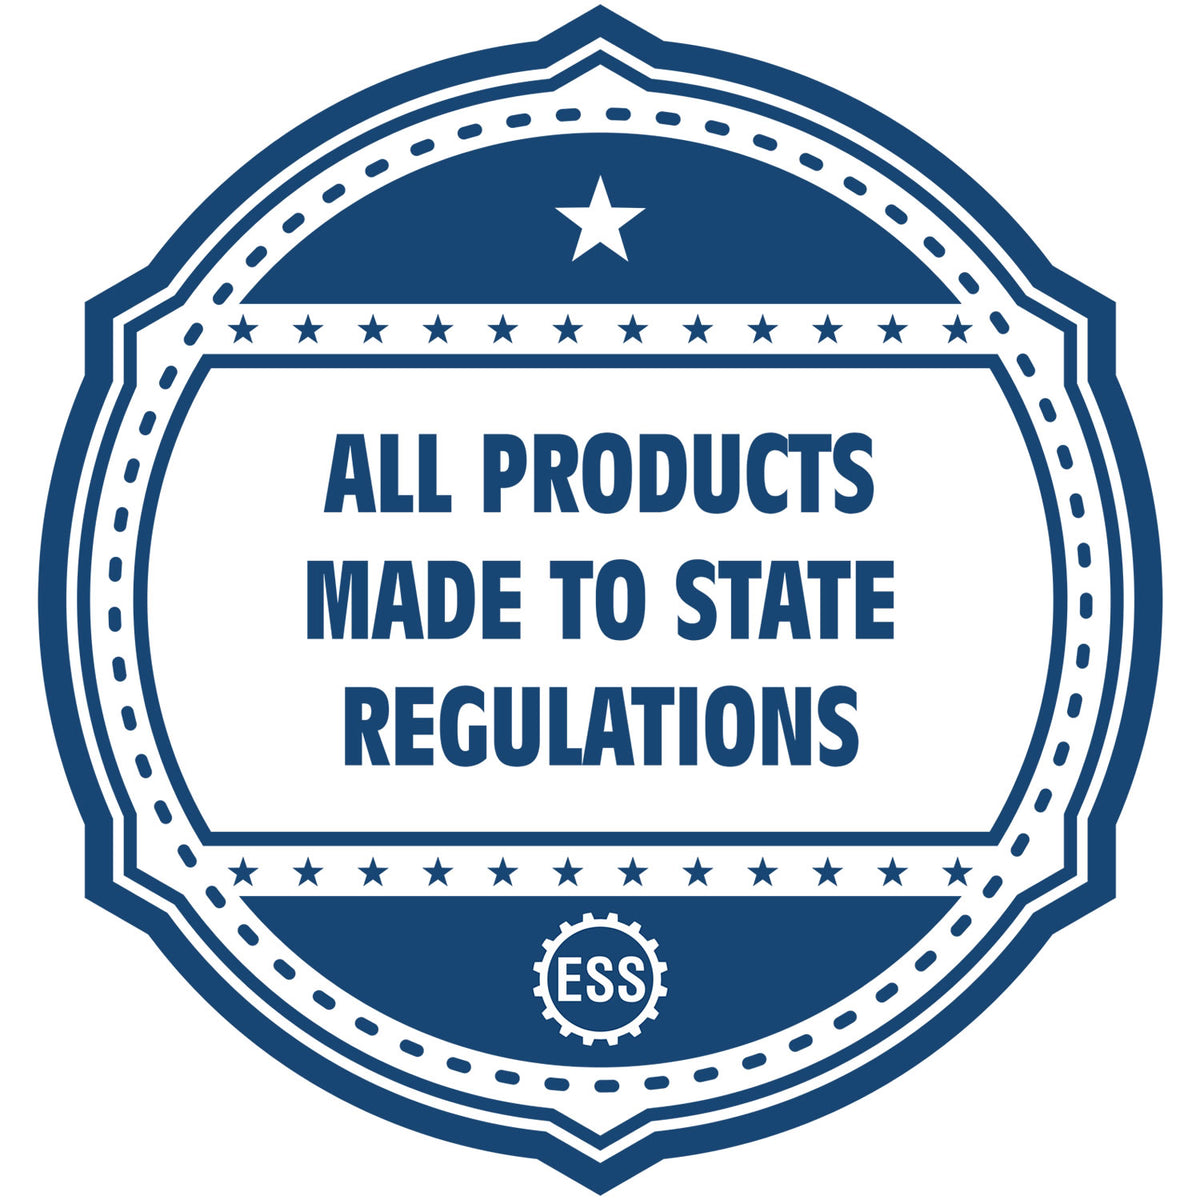 An icon or badge element for the Wyoming Engineer Desk Seal showing that this product is made in compliance with state regulations.